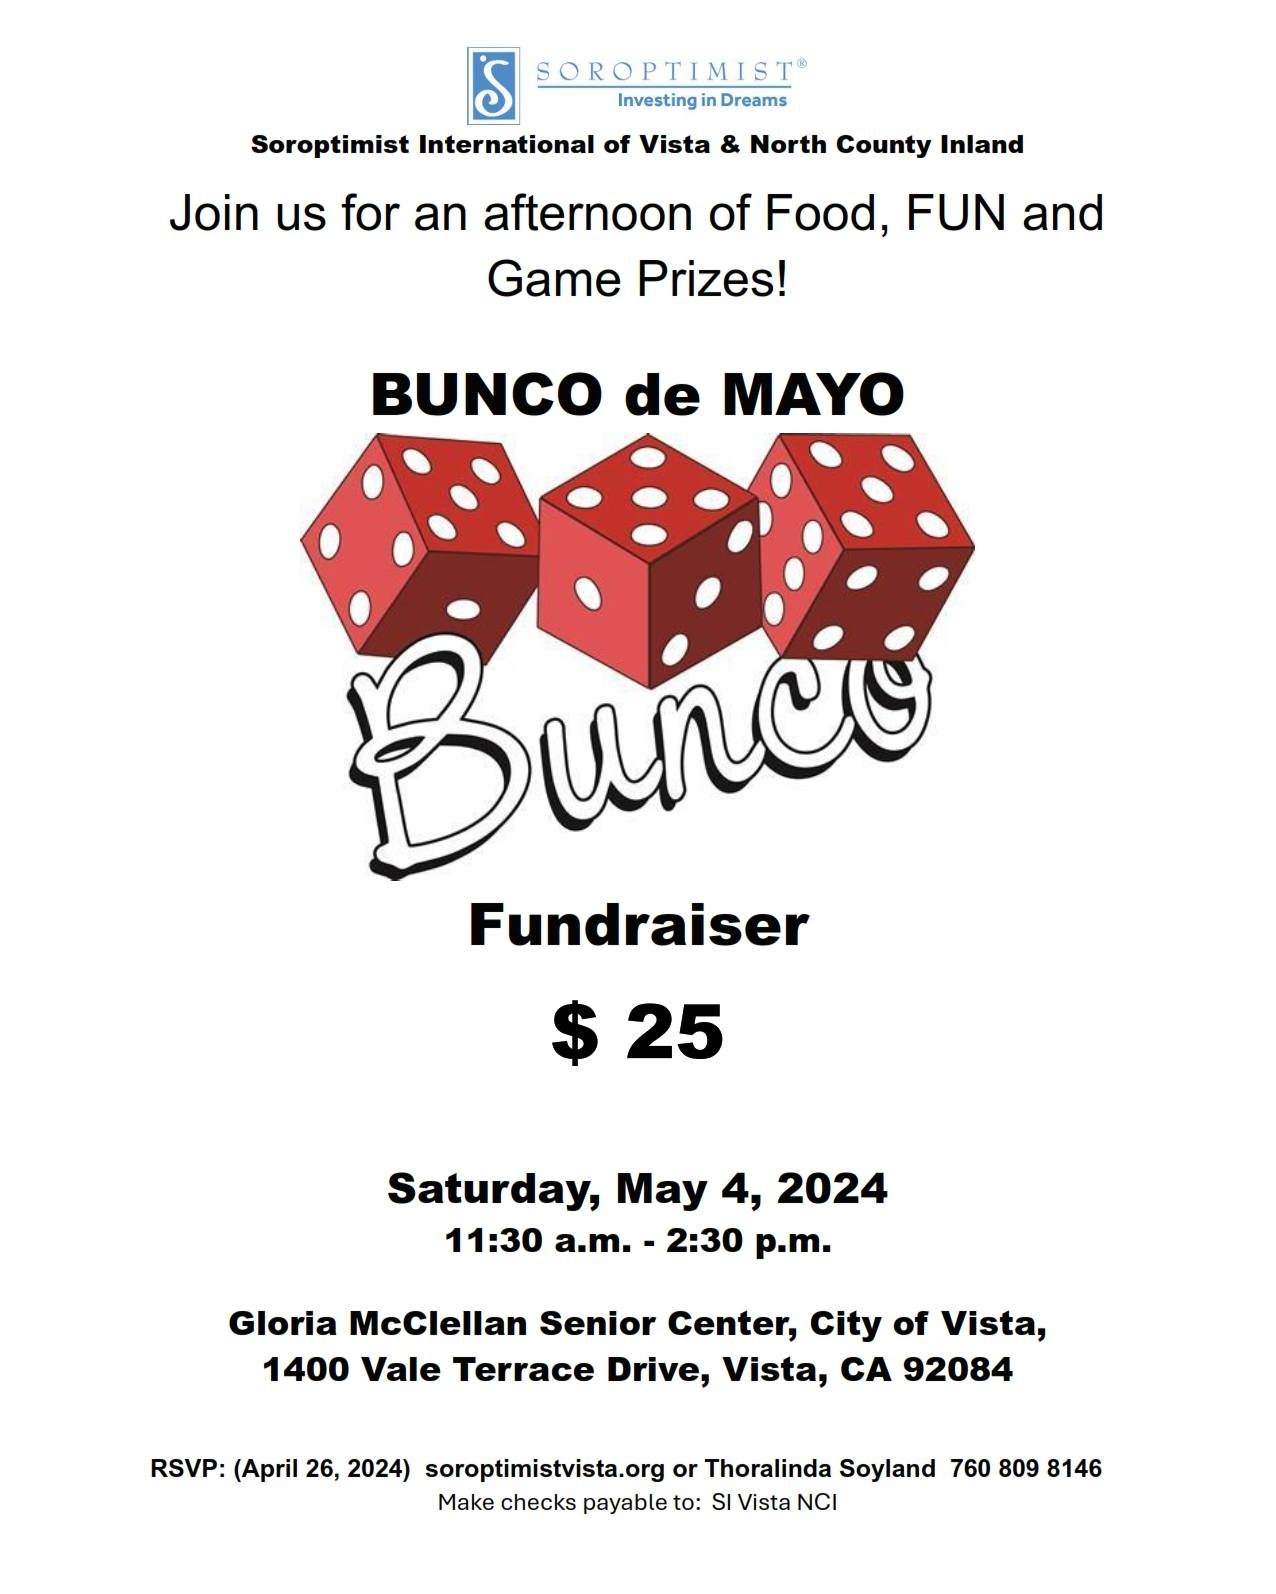 Soroptimist International of Vista and North County Inland is Throwing their BUNCO de MAYO Fundraiser this Saturday, May 4th from 11:30am - 2:30pm! You can support by reserving your tickets now at www.soroptimistvista.org 👀
.
.
#BuncoDeMayo #Soropti